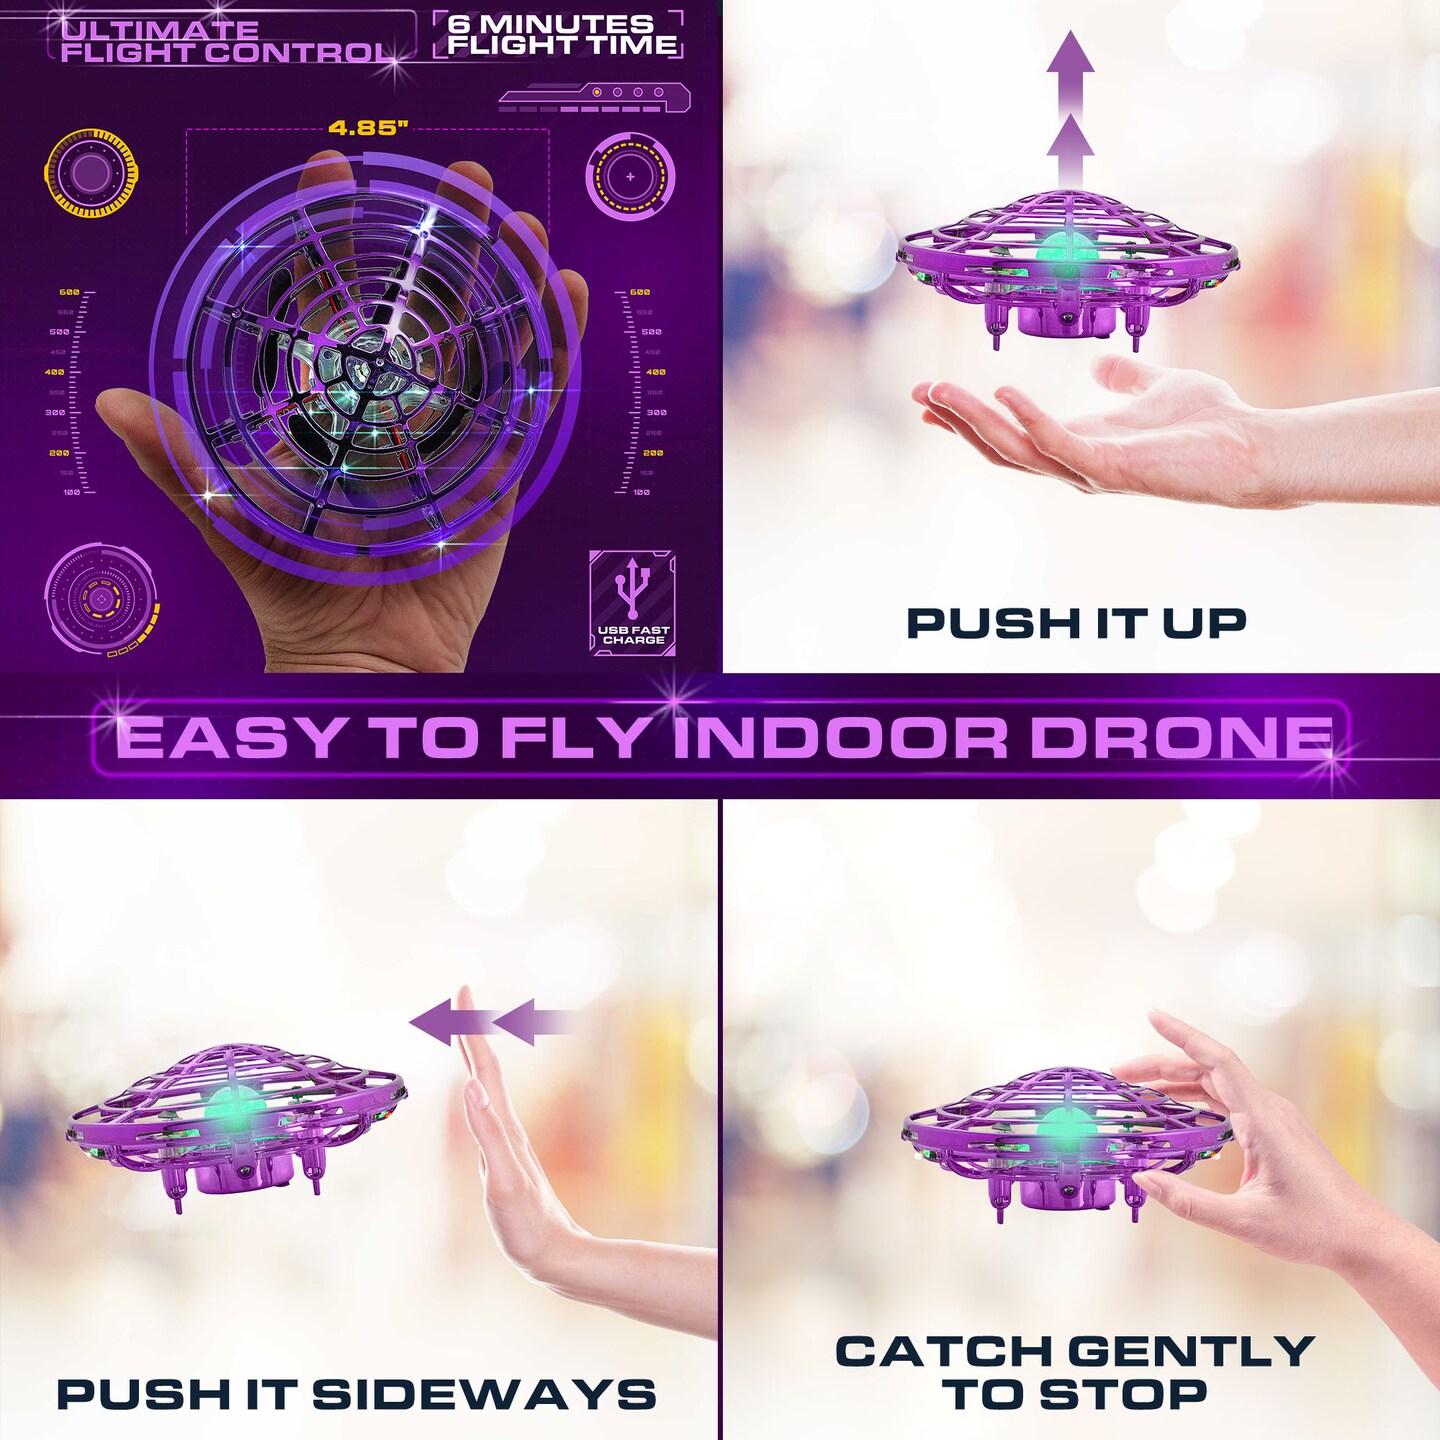 Force1 Scoot Skeet Drone Electronic Shooting Game For Kids and Adults- Purple/Green